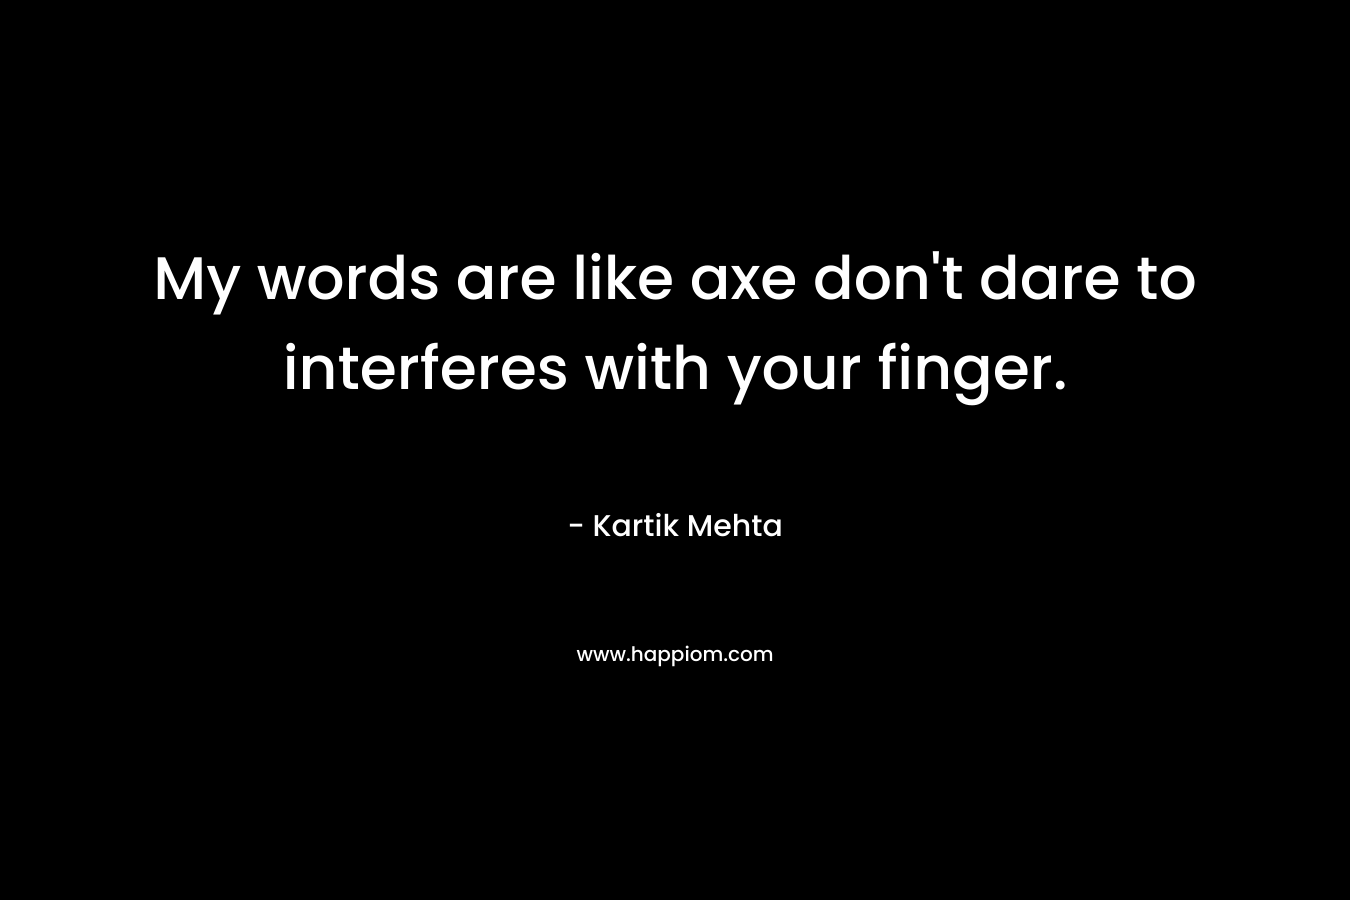 My words are like axe don't dare to interferes with your finger.